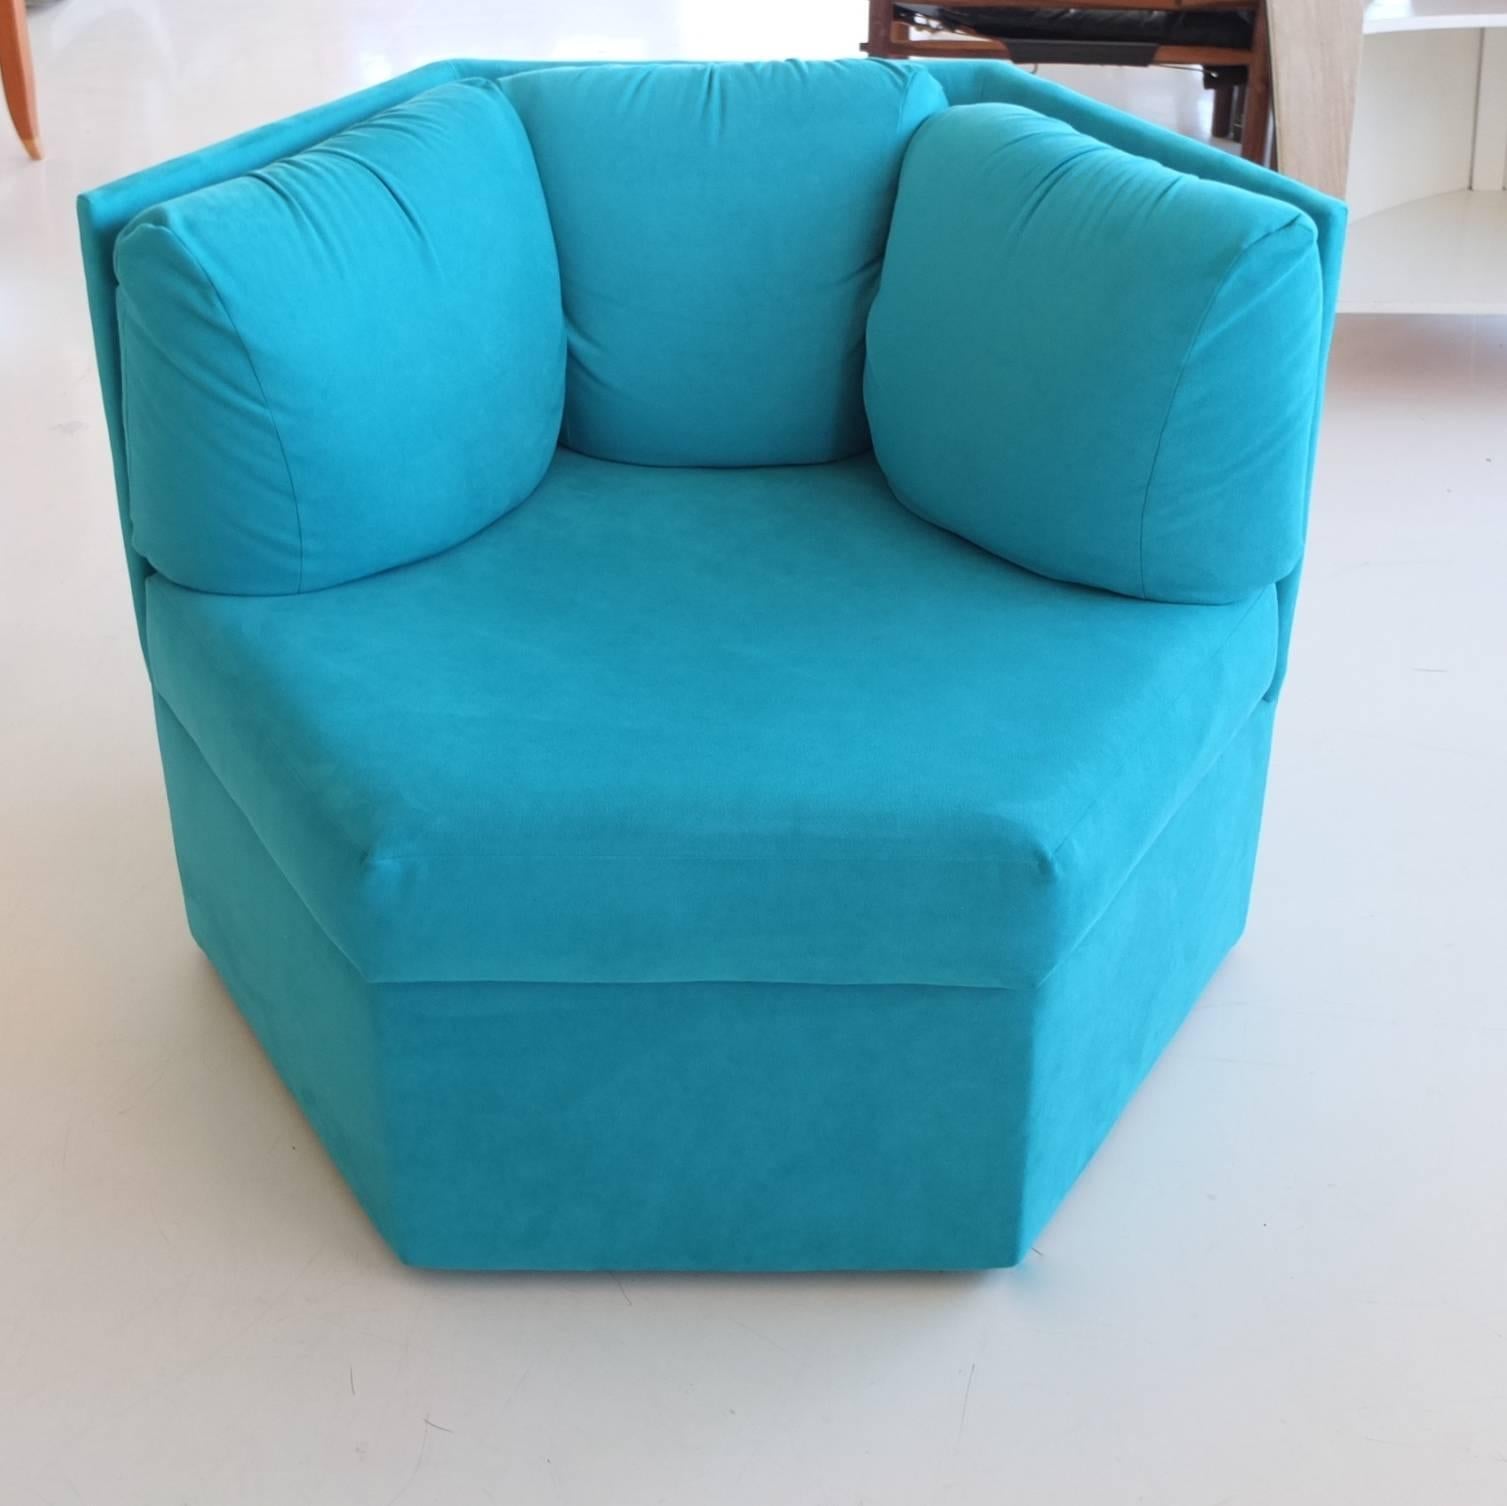 Pair of Milo Baughman for Thayer Coggin hexagonal swivel club chairs upholstered in turquoise ultra suede. Like brand new.

Attached triple back cushions and attached seat cushion.

Swivels 360 degrees.

Listed separately are three additional chairs